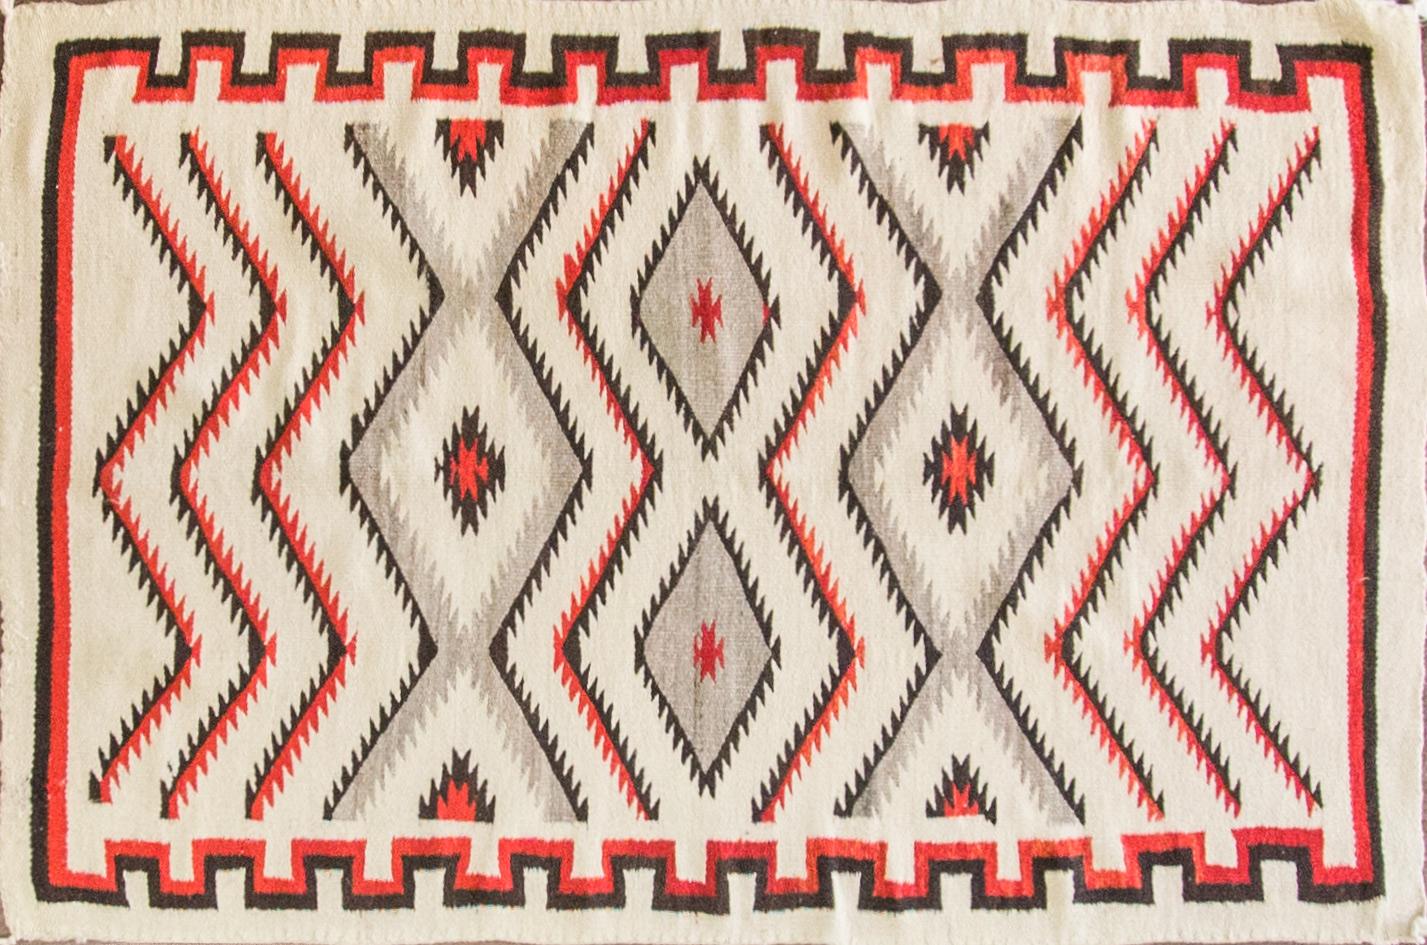 A typical Navajo rug has approximately 30 wefts to the linear inch. A two grey hills from Toadlena average about 45. The finer pieces frequently have upwards of 80. When a textile has 80 or more wefts per inch, it is considered a tapestry, not a